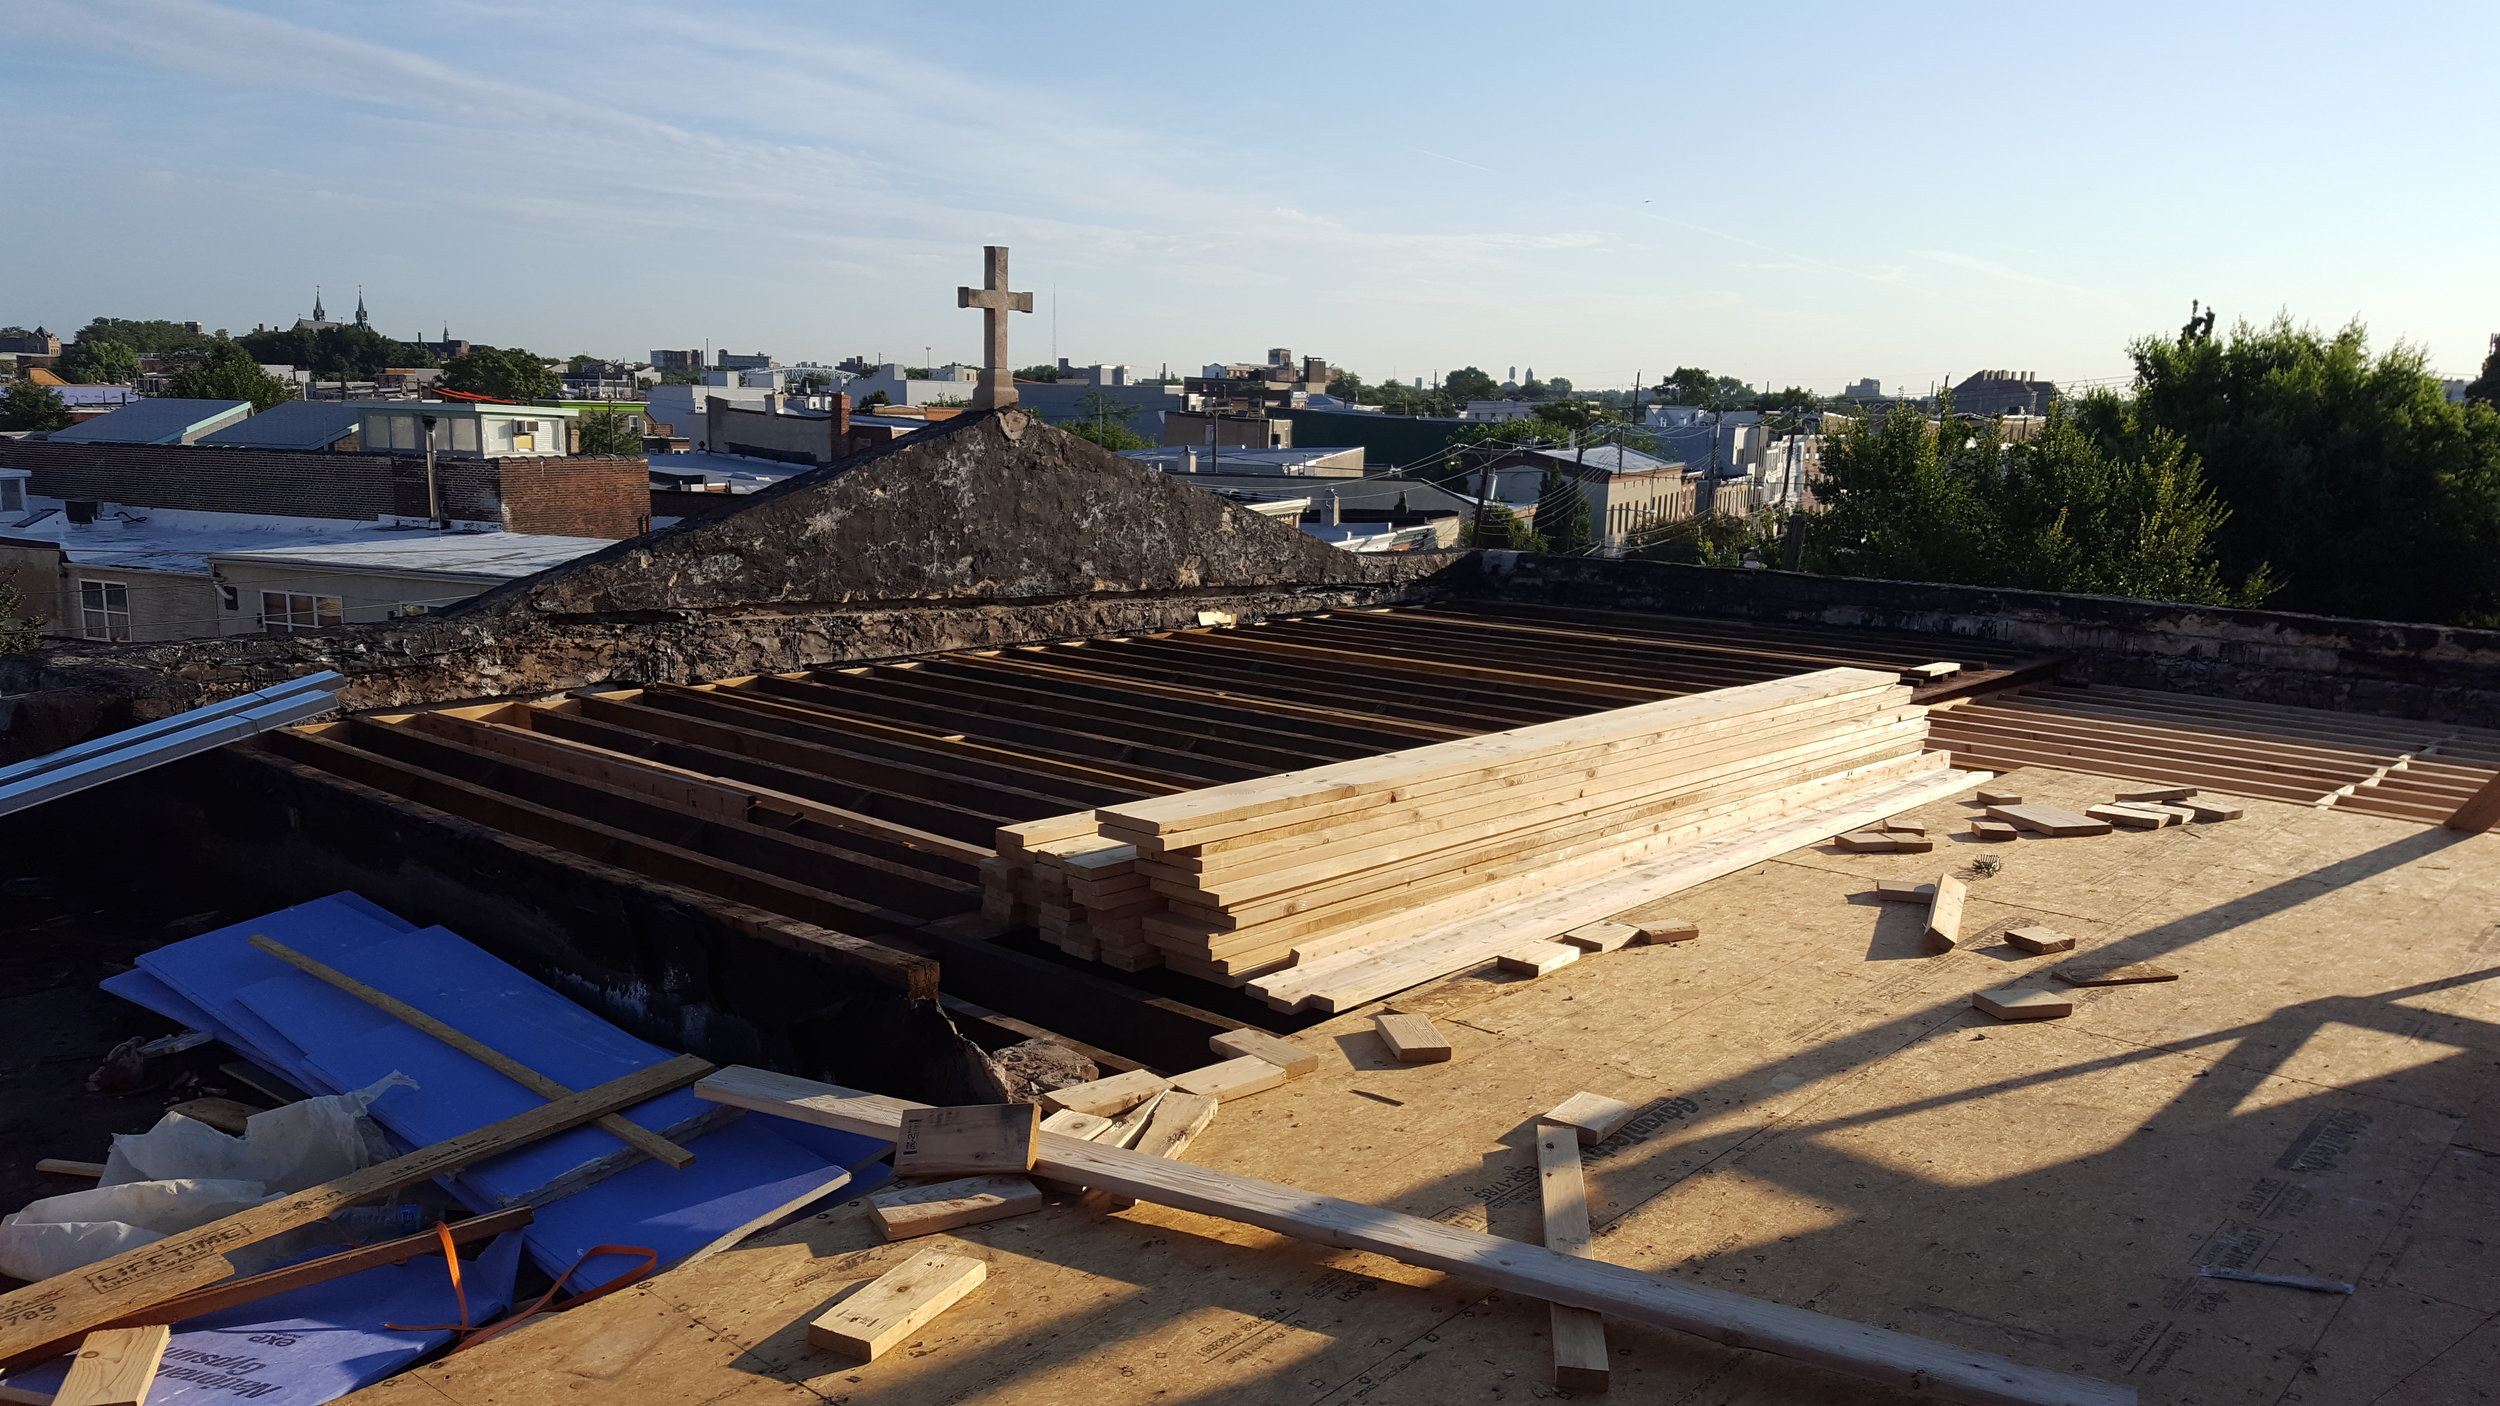 View from the rooftop of the original building, before the third floor additions were built.